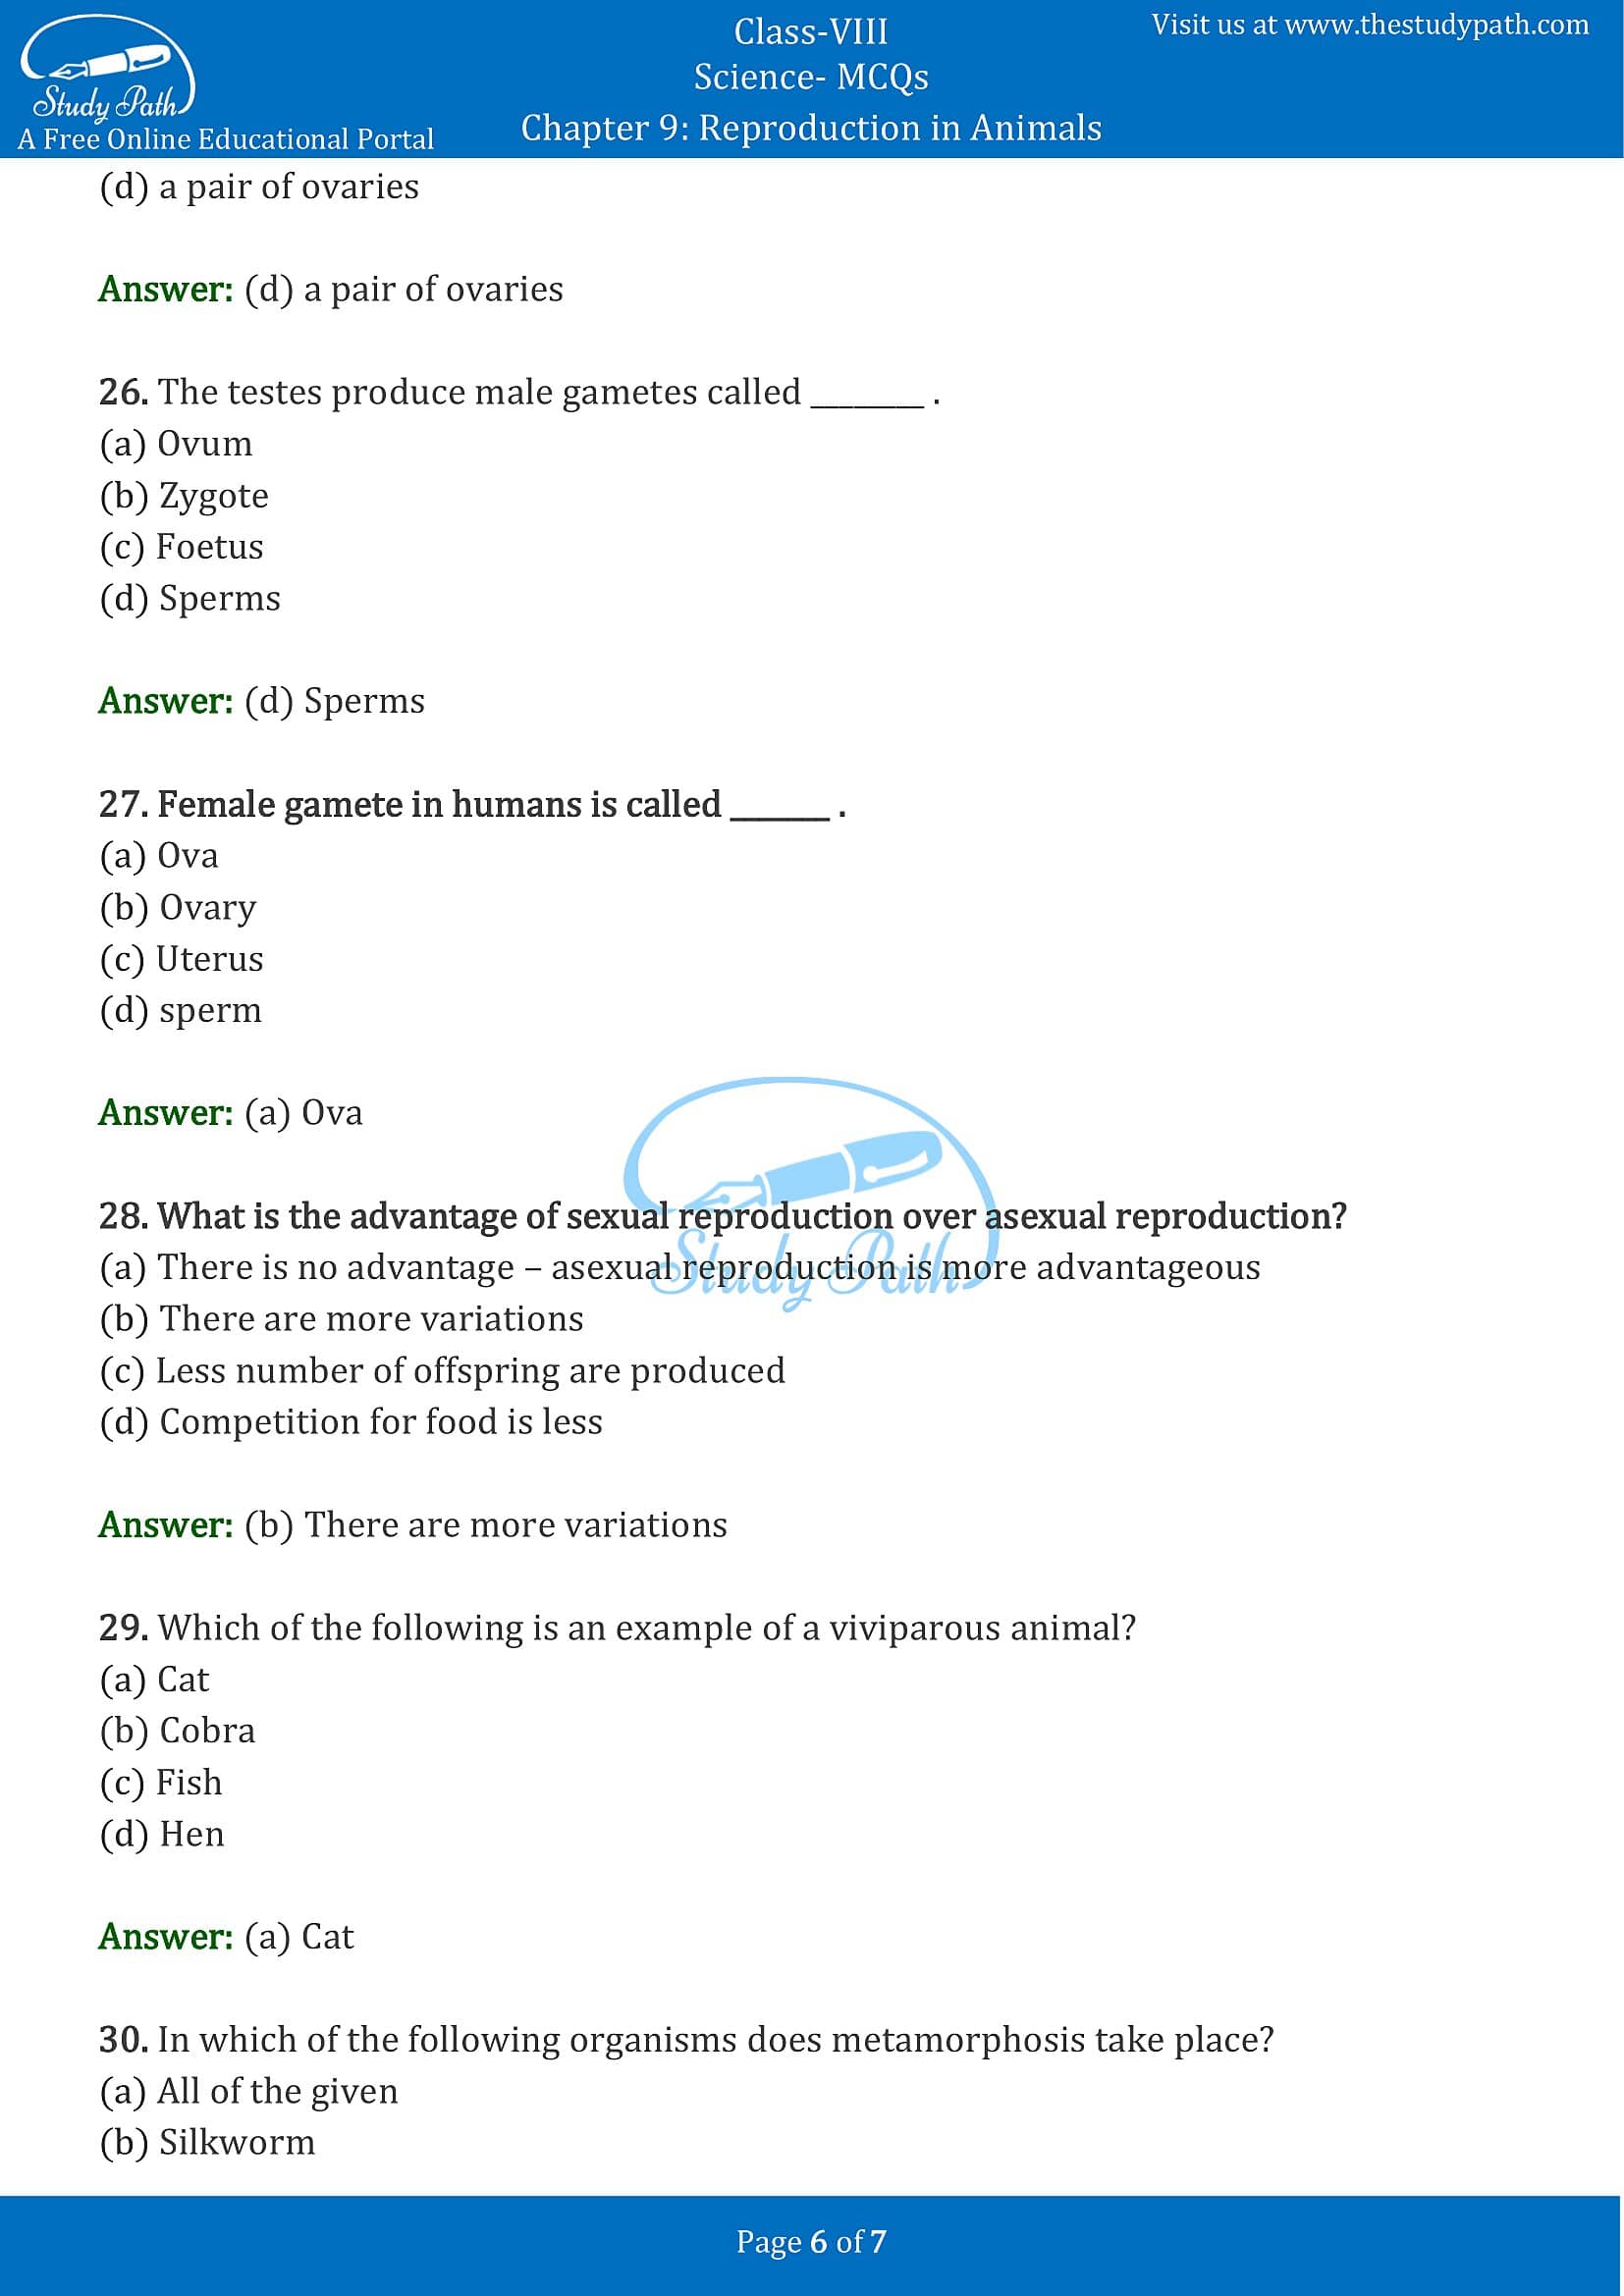 Class 8 Science Chapter 9 Reproduction in Animals MCQ with Answers